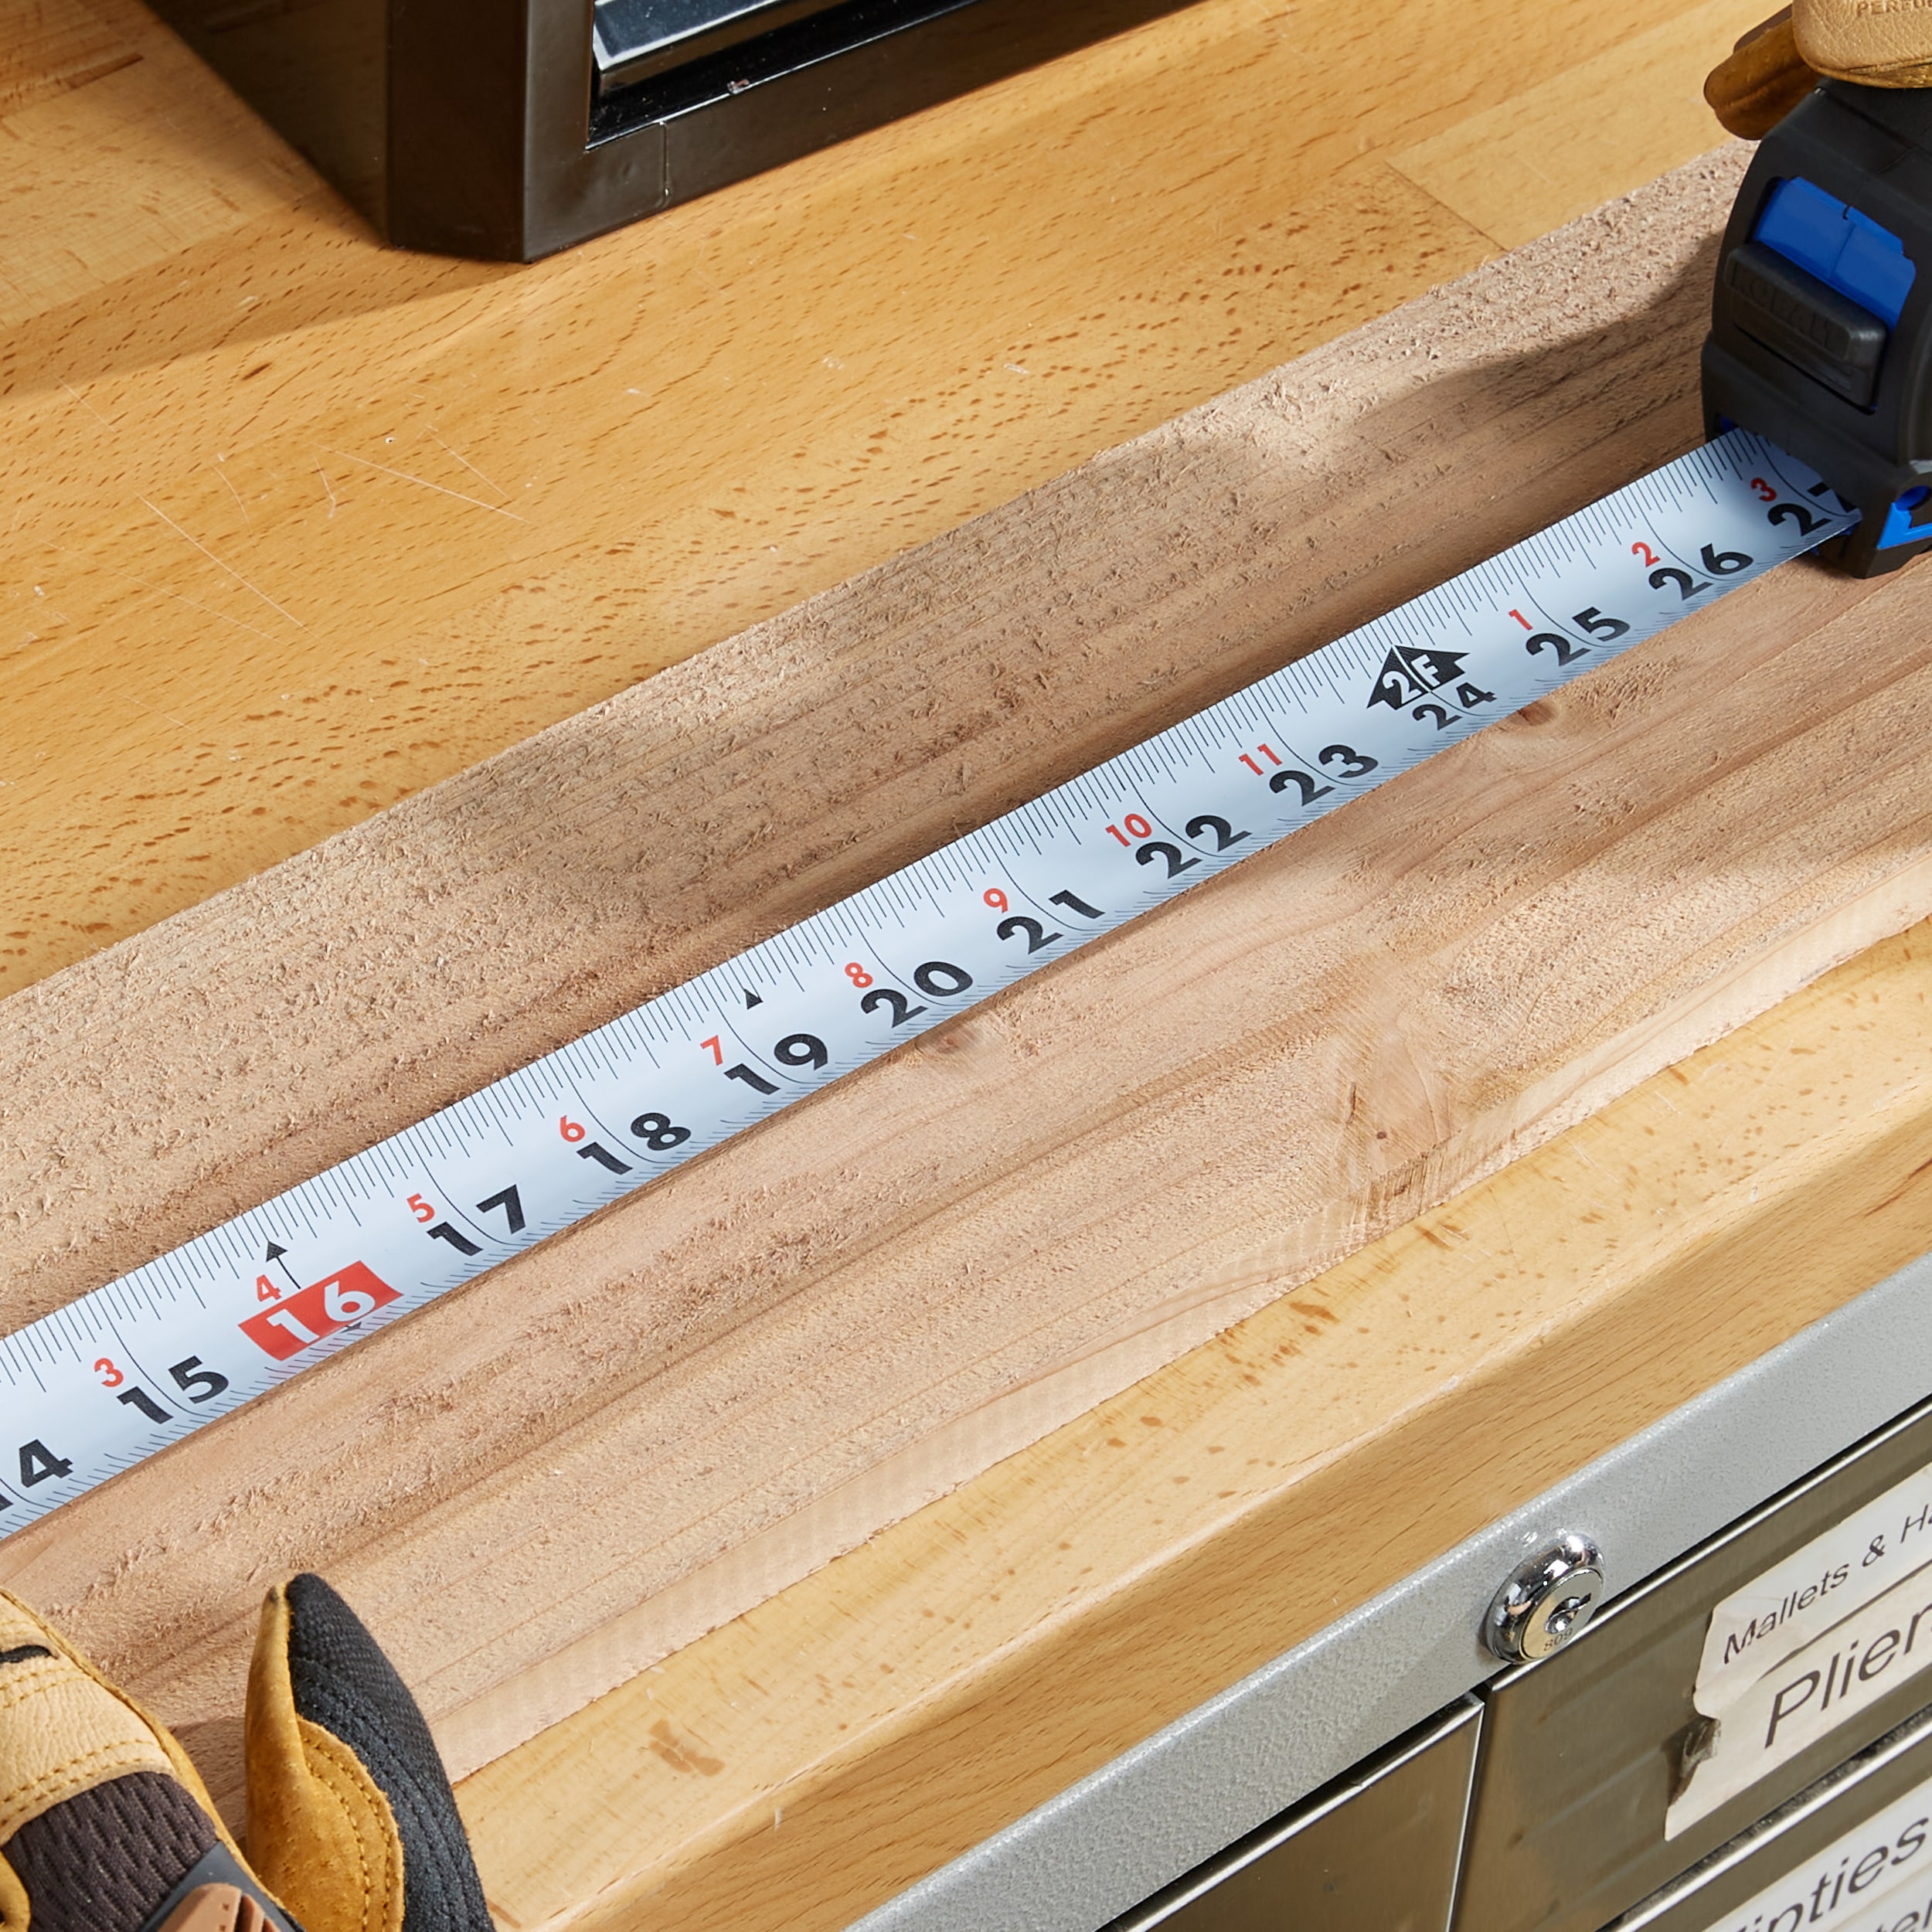 Kobalt Compact 16-ft Tape Measure in the Tape Measures department at